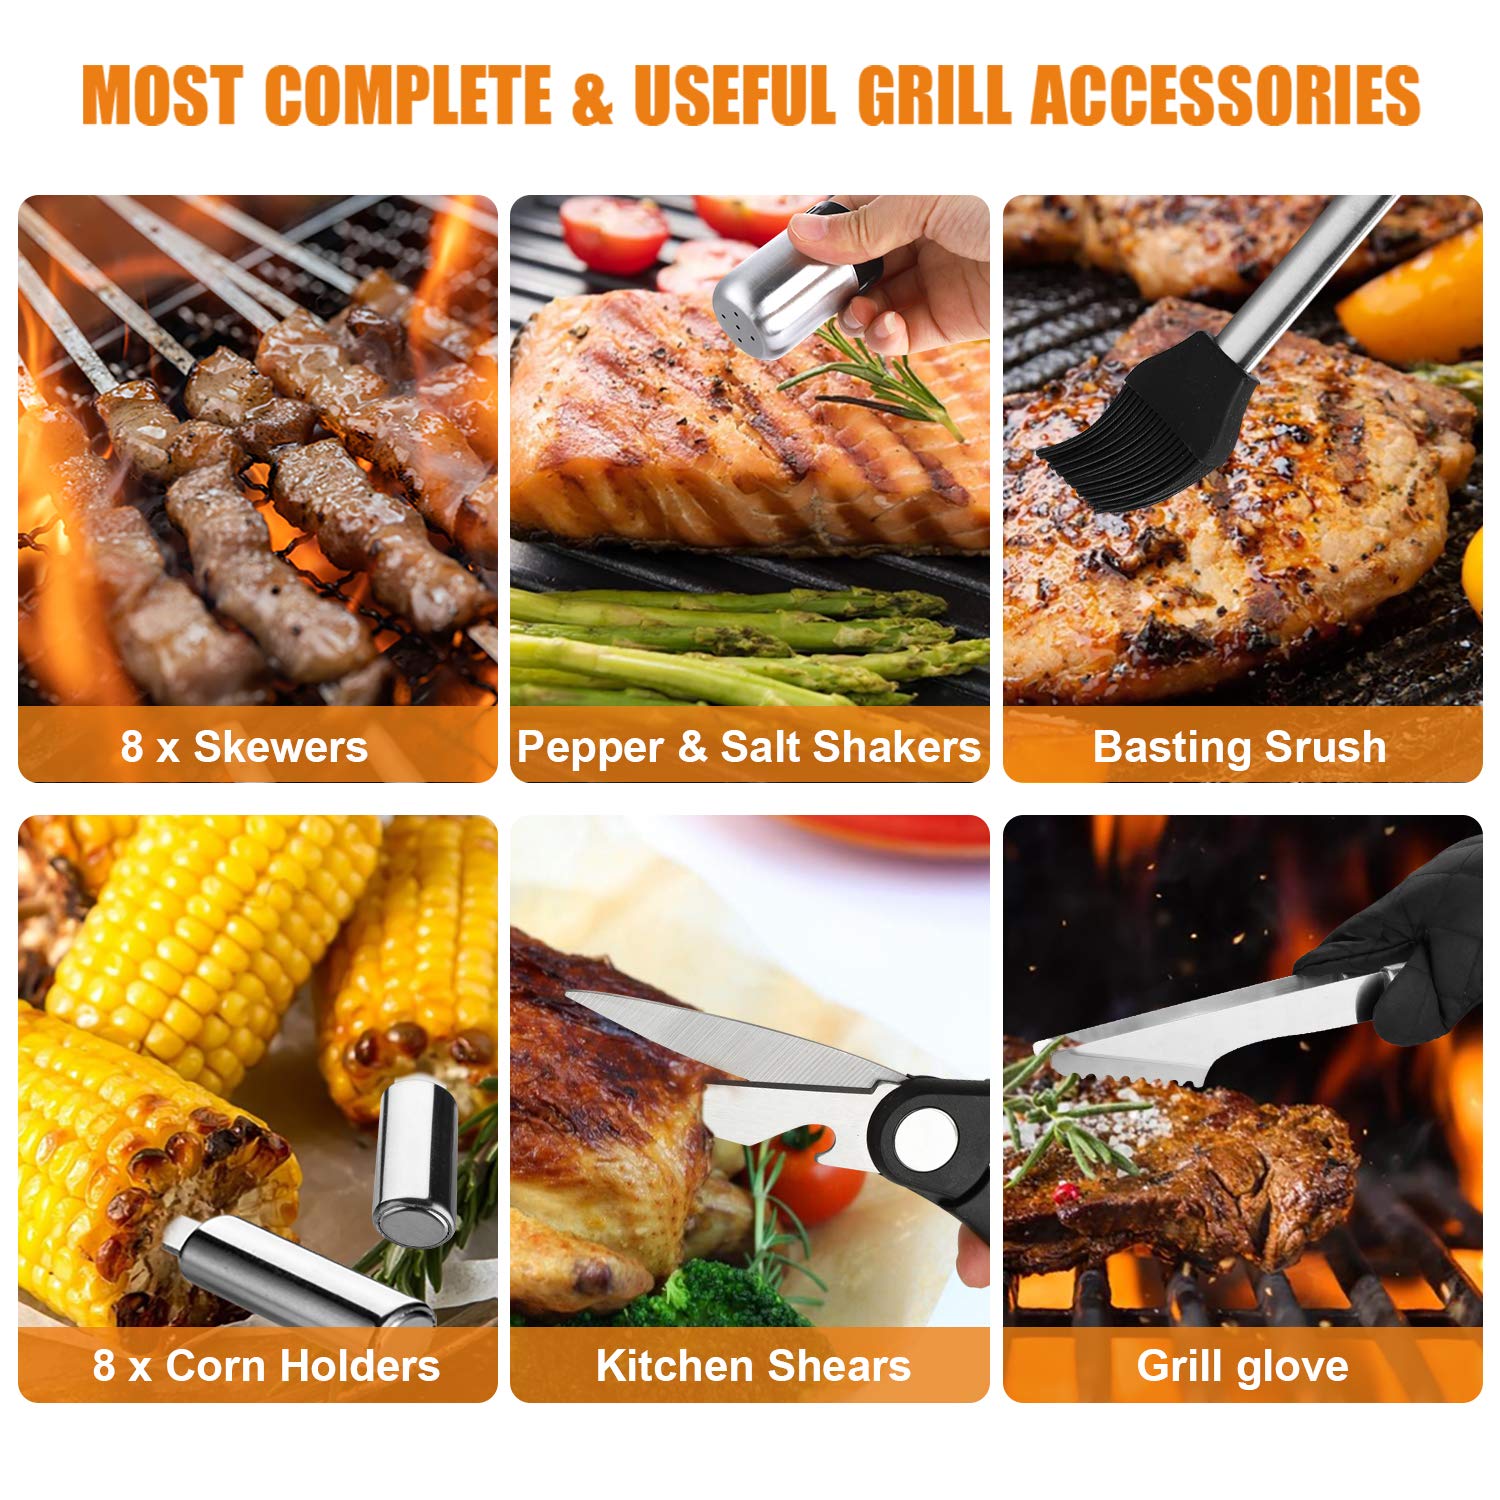 BBQ Grill Accessories Set, 38Pcs Stainless Steel Grill Tools Grilling Accessories with Aluminum Case, Thermometer, Grill Mats for Camping/Backyard Barbecue, Grill Utensils Set for Men Women - image 3 of 7